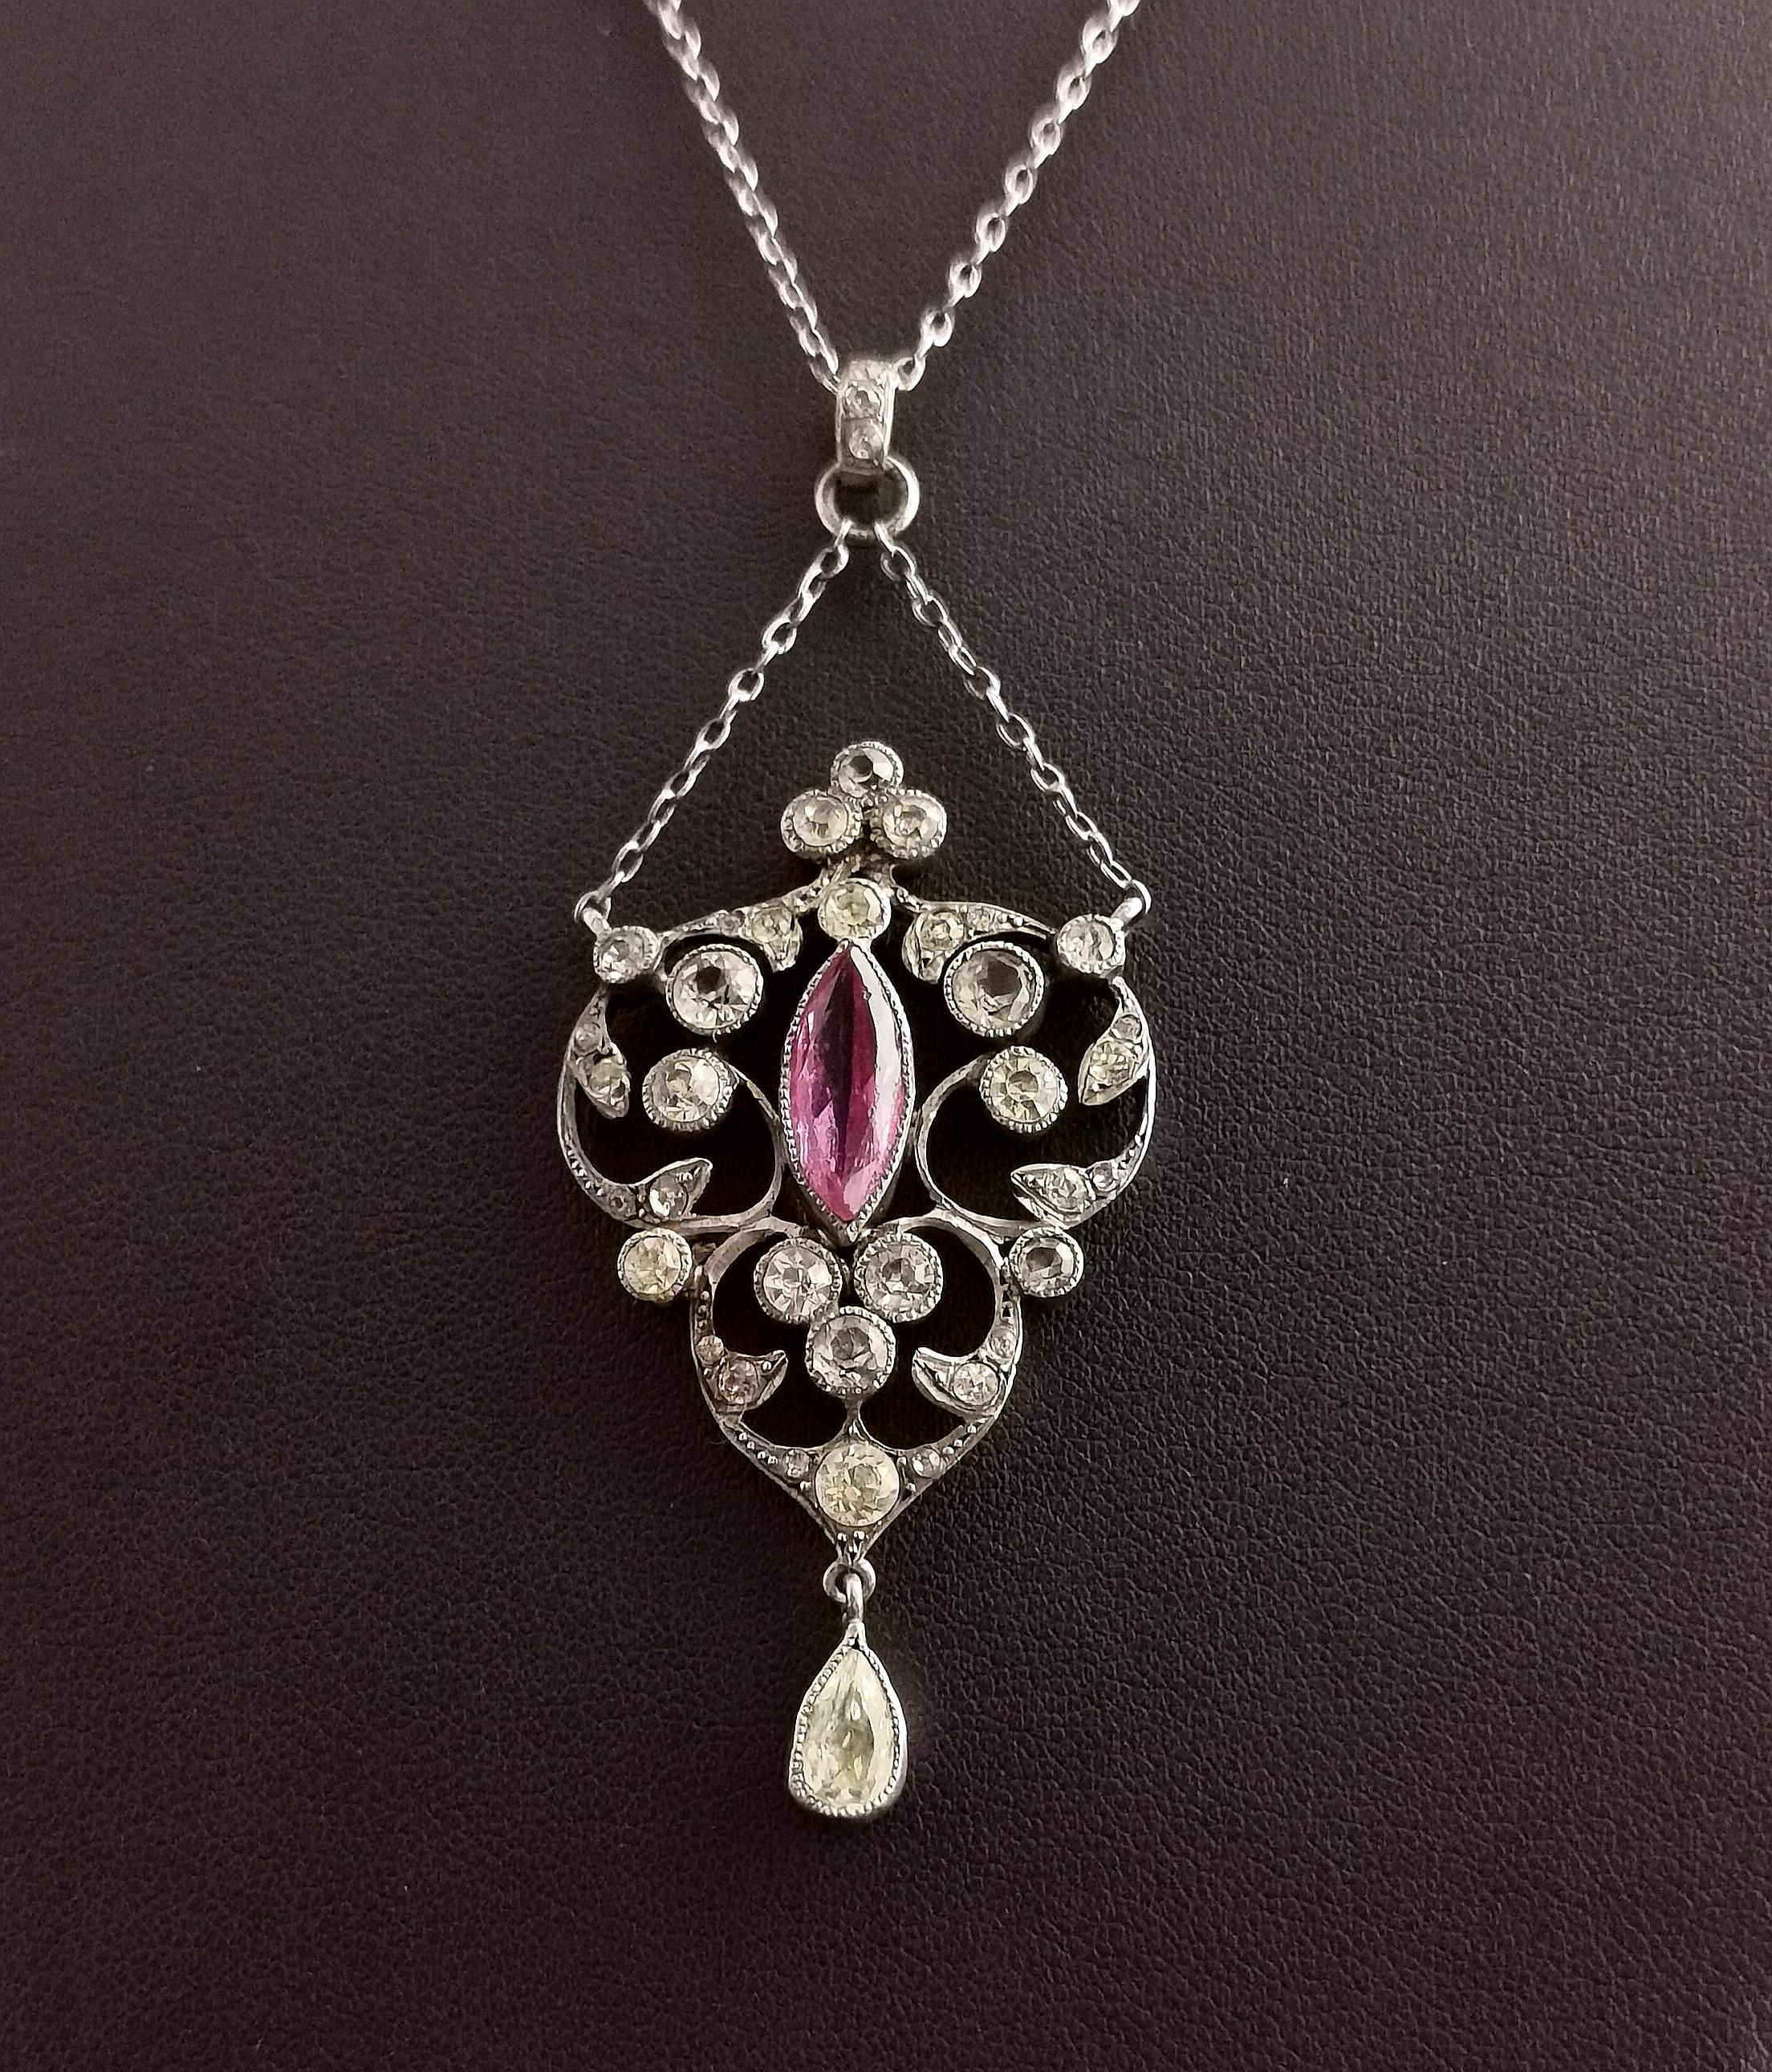 A stunning Antique Edwardian era, Belle Epoque sterling silver paste pendant necklace.

It has a large pretty lavalier style pendant drop suspended from a small length of chain set with old diamond paste stones and a single Amethyst paste, the